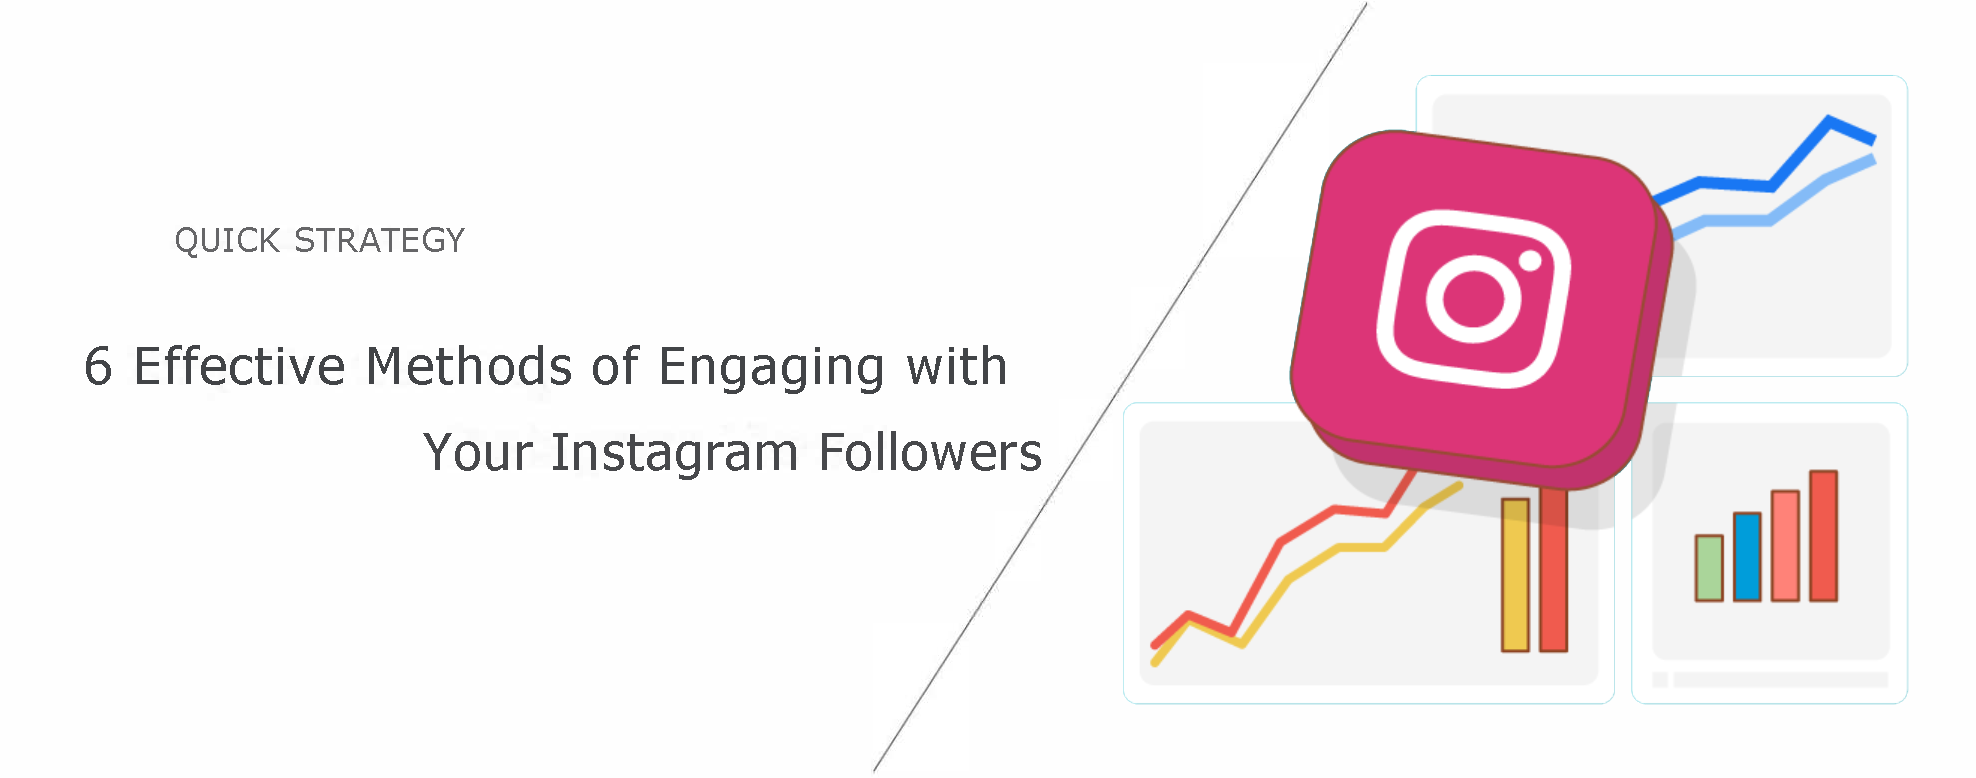 6 Effective Methods of Engaging with Your Instagram Followers